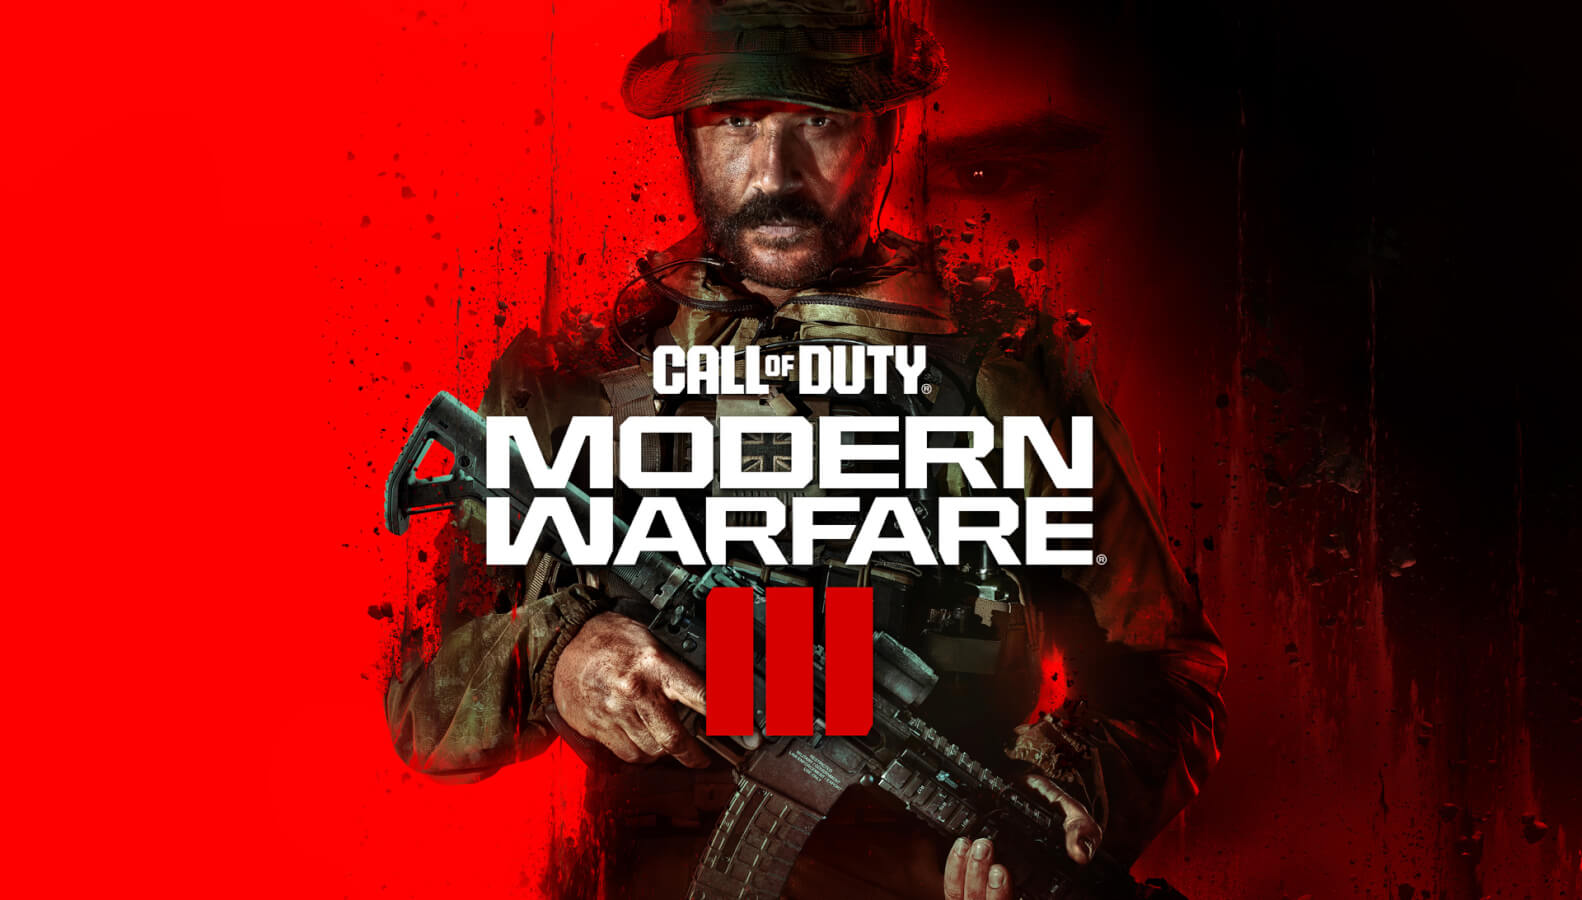 Play Modern Warfare 3 for Free on These Dates, Here's the Content Included - Hardware Times IN